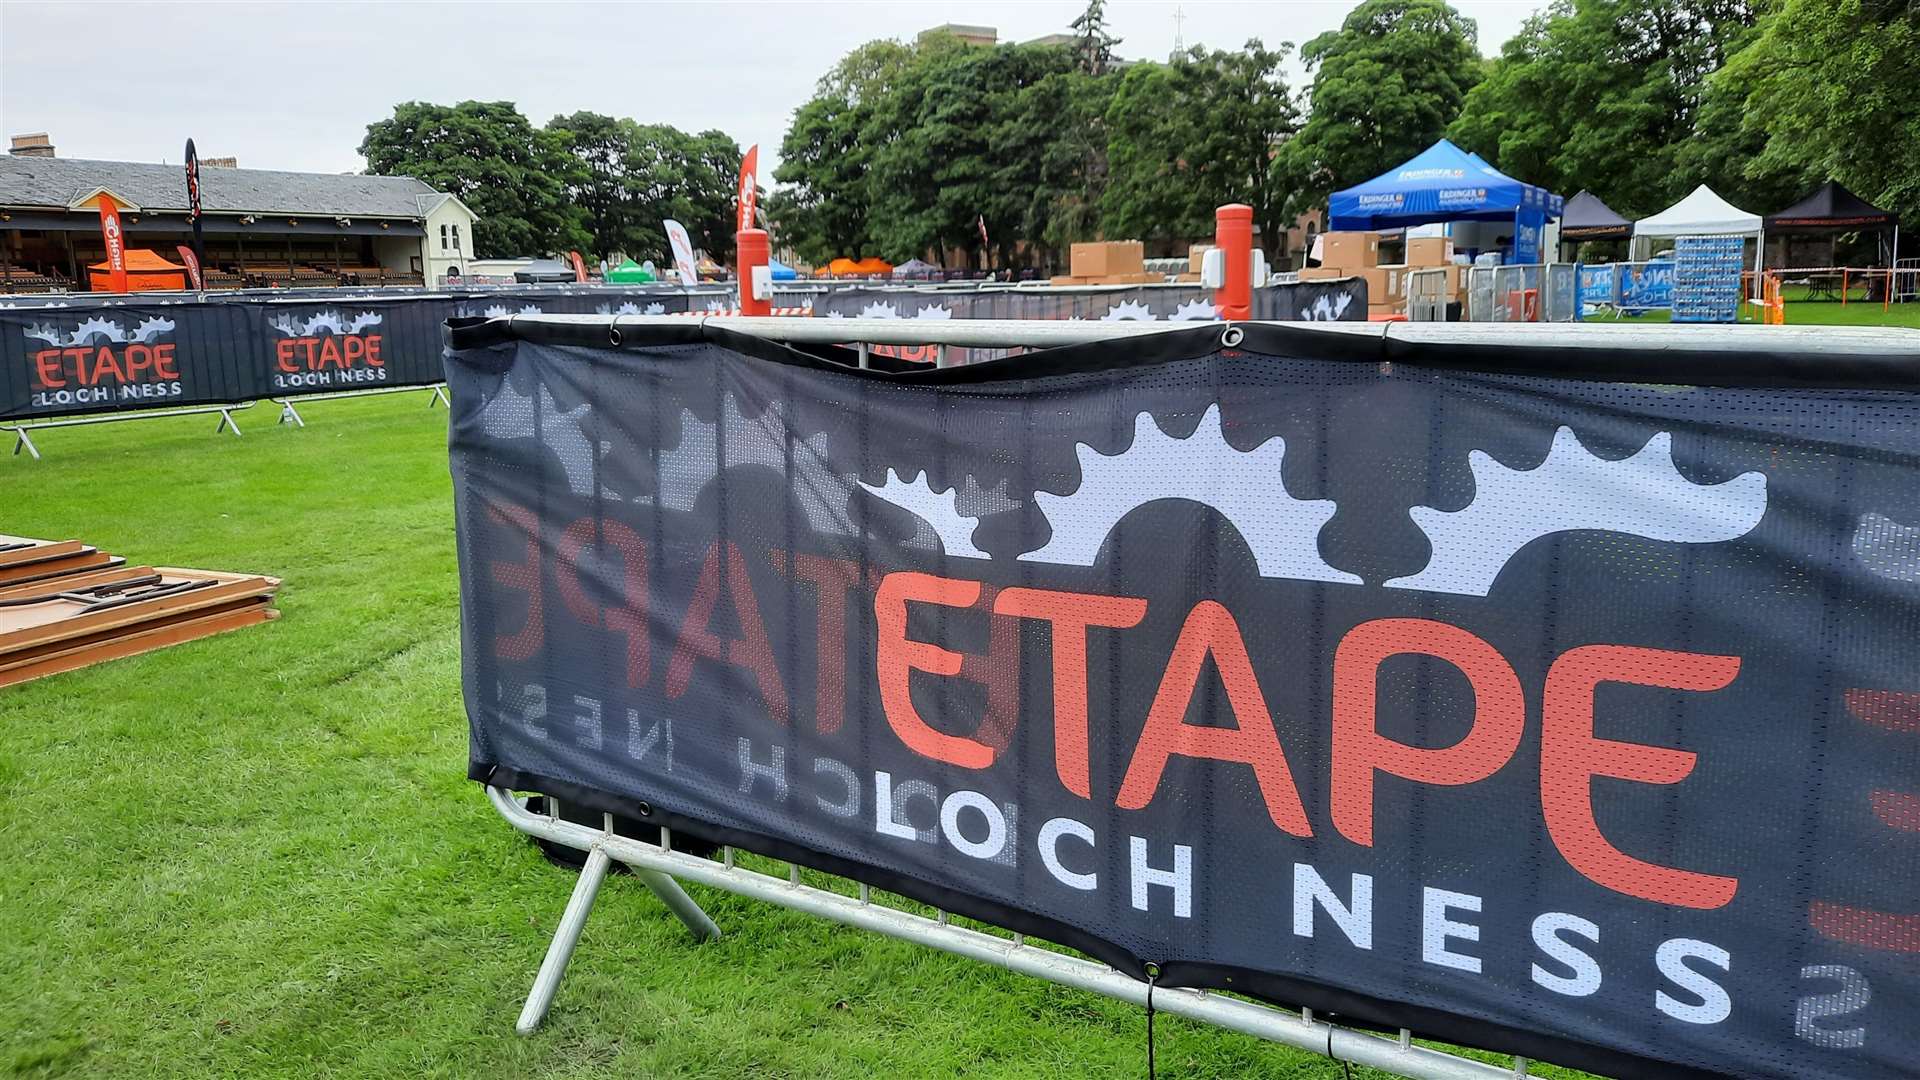 The event hub for the 2021 Etape Loch Ness is at Inverness's Northern Meeting Park.